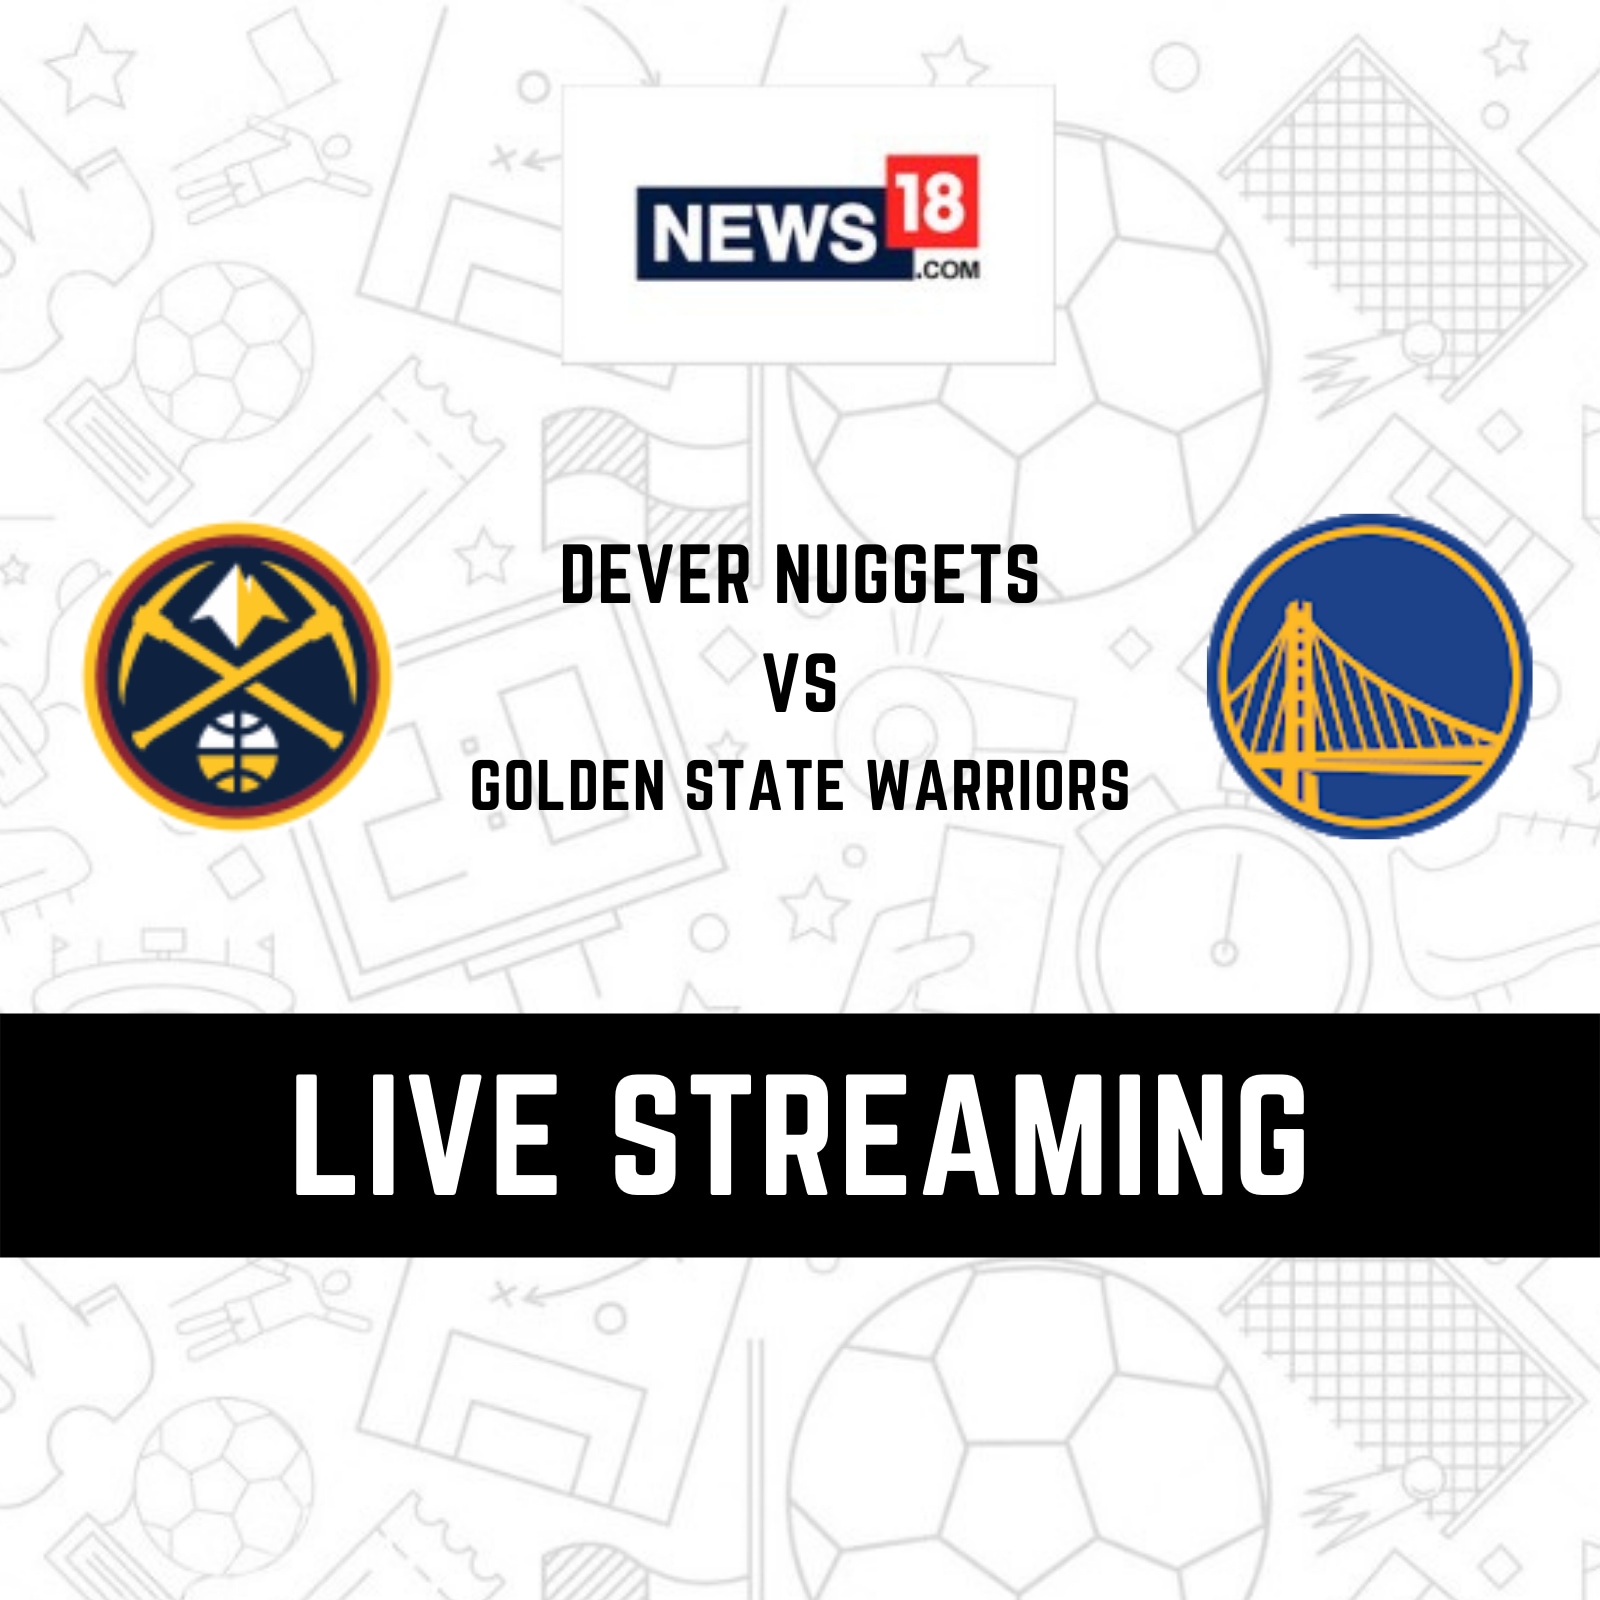 golden state warriors live streaming